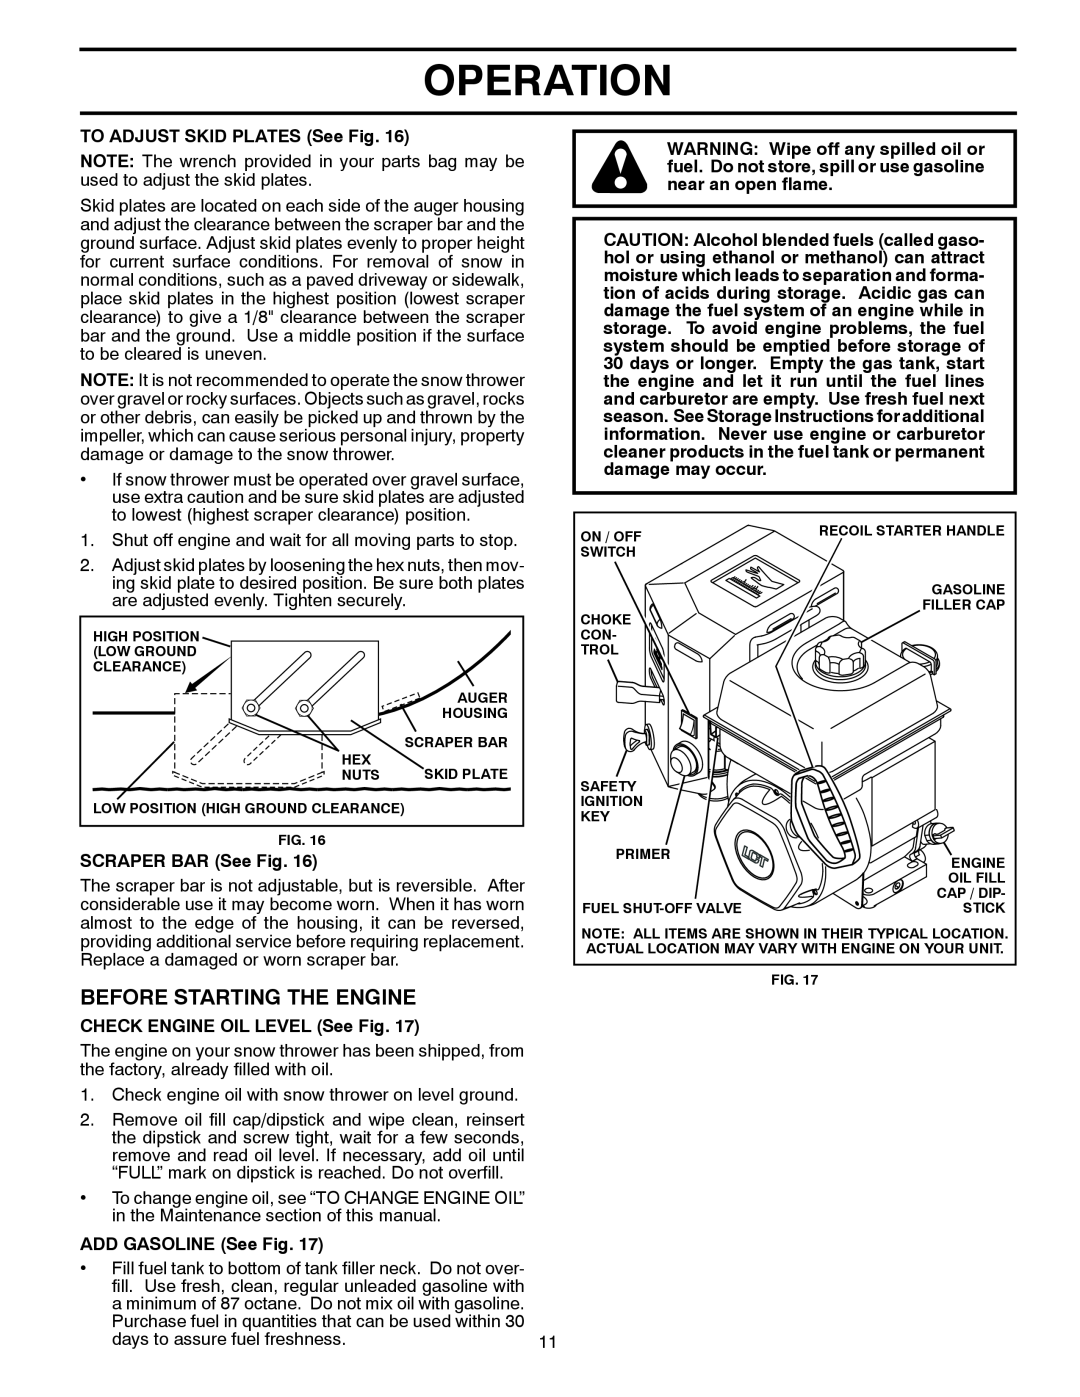 Poulan 96192002801, 430005 owner manual Before Starting The Engine, Operation 